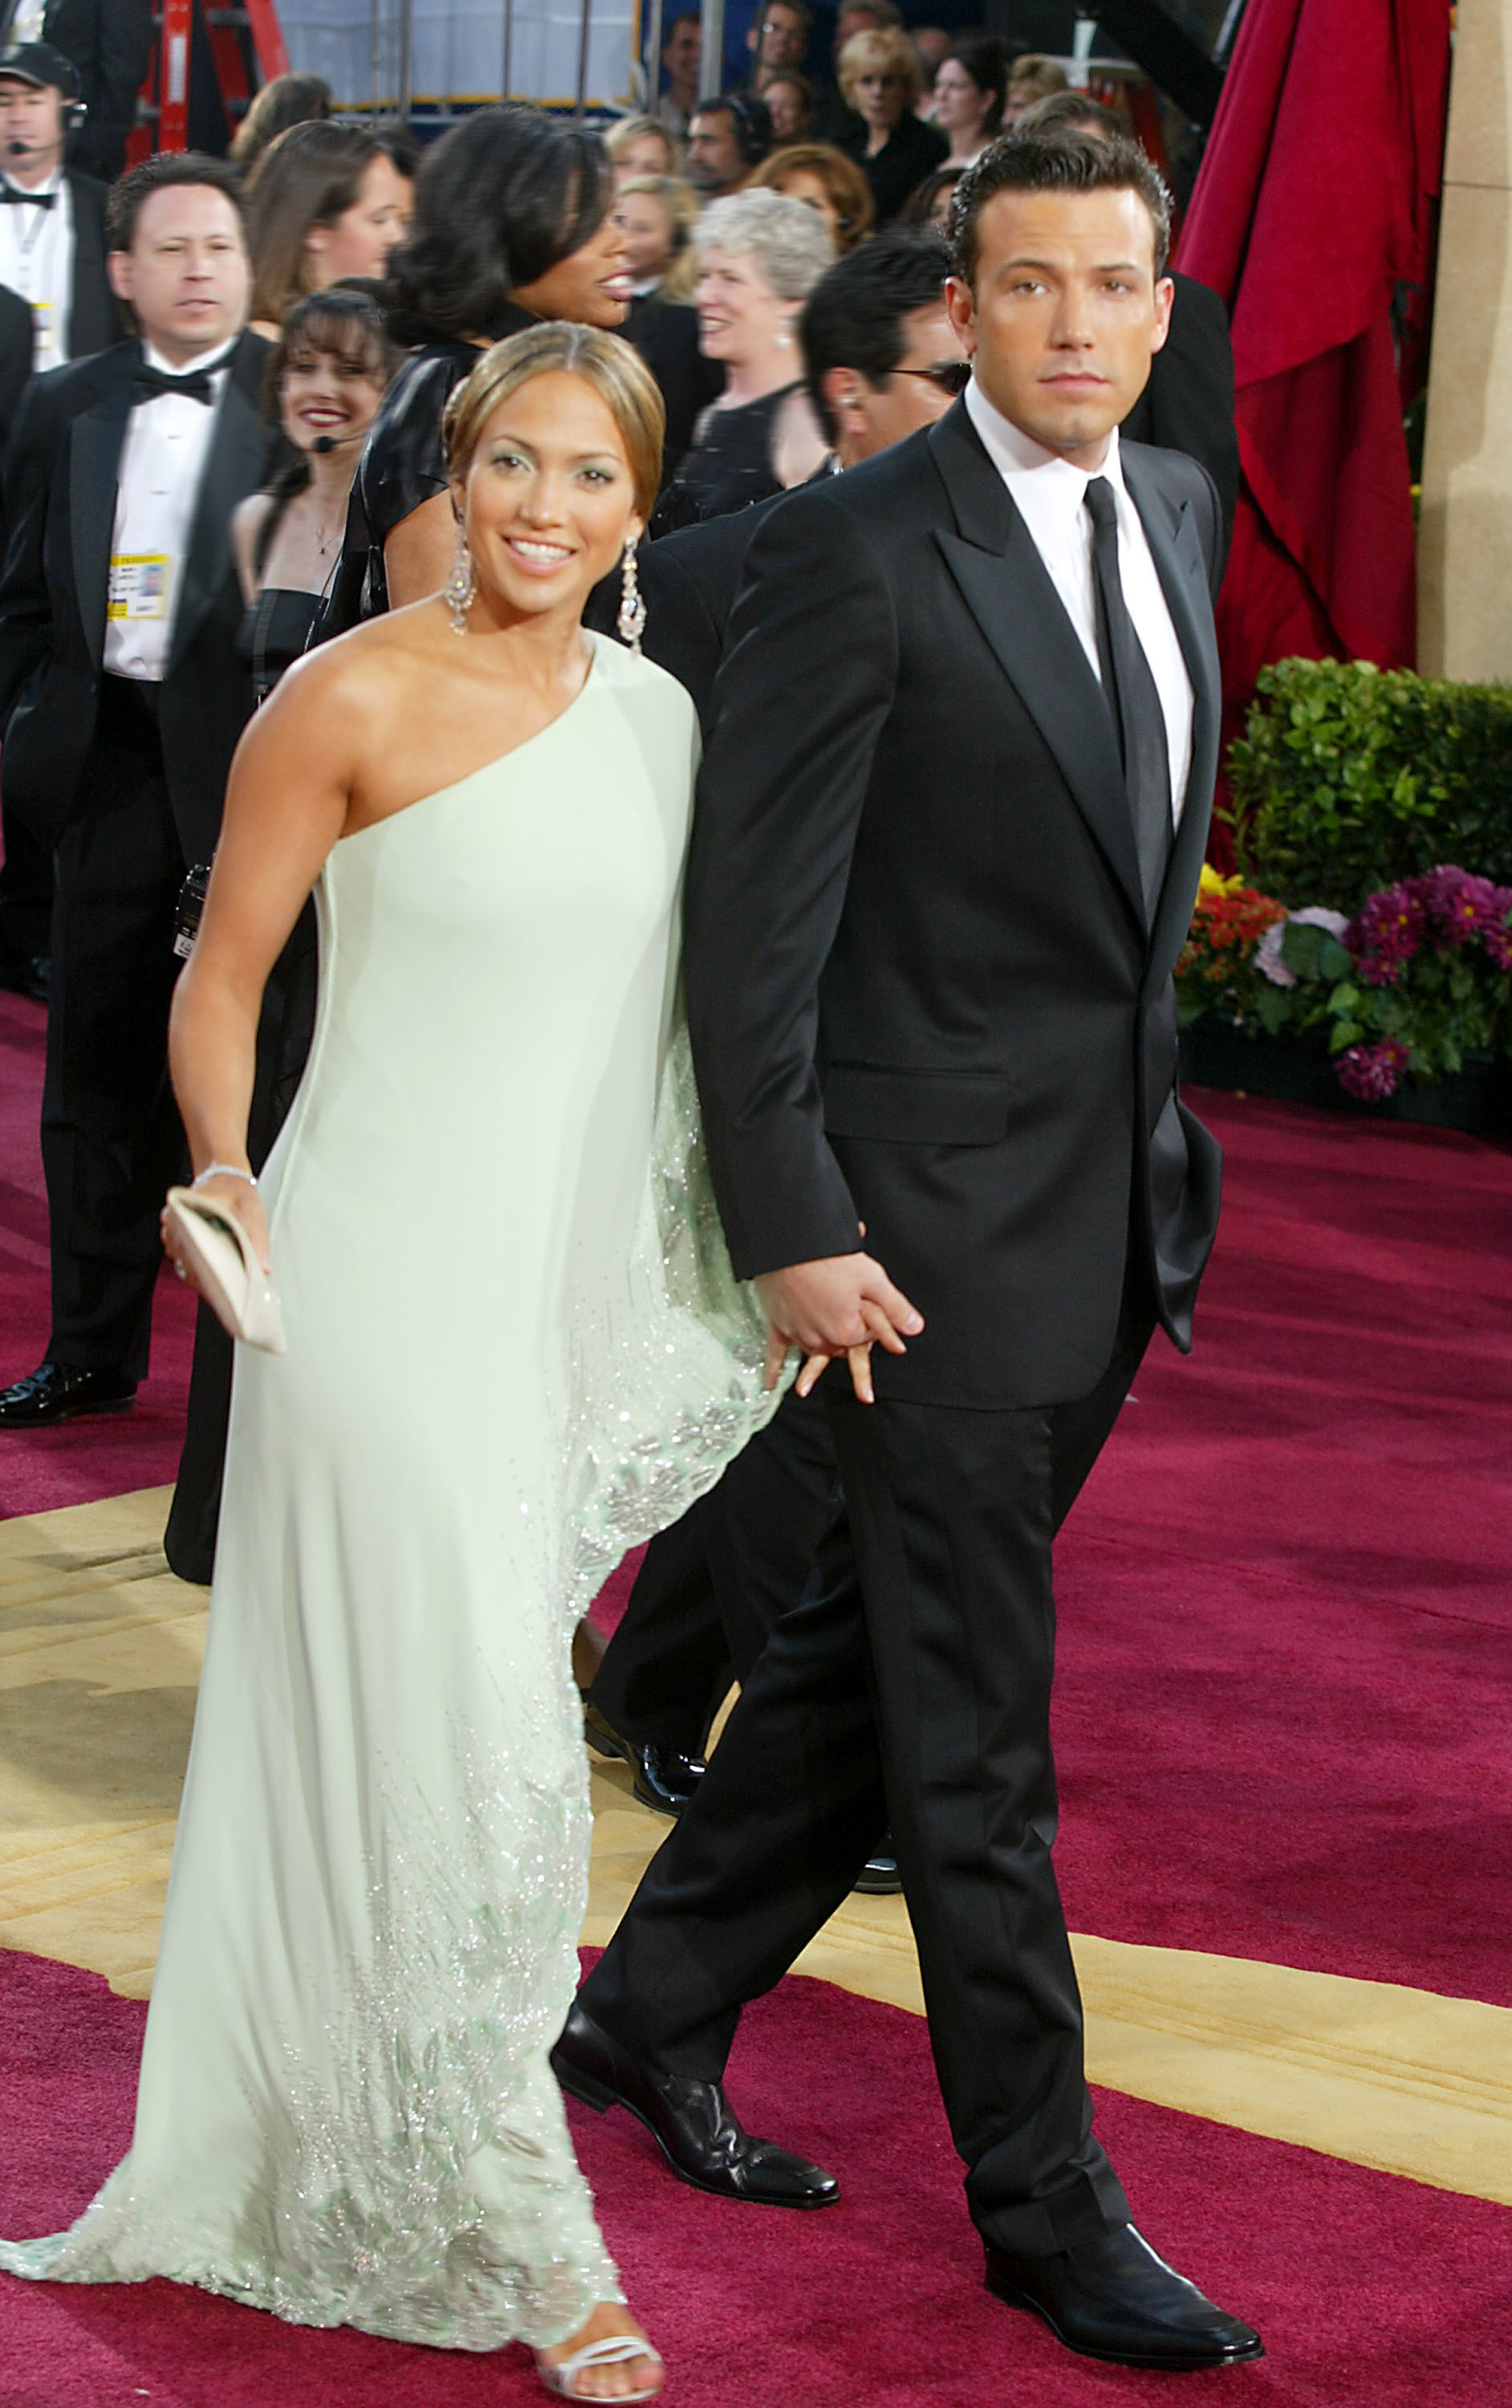 Lopez and Affleck on the red carpet